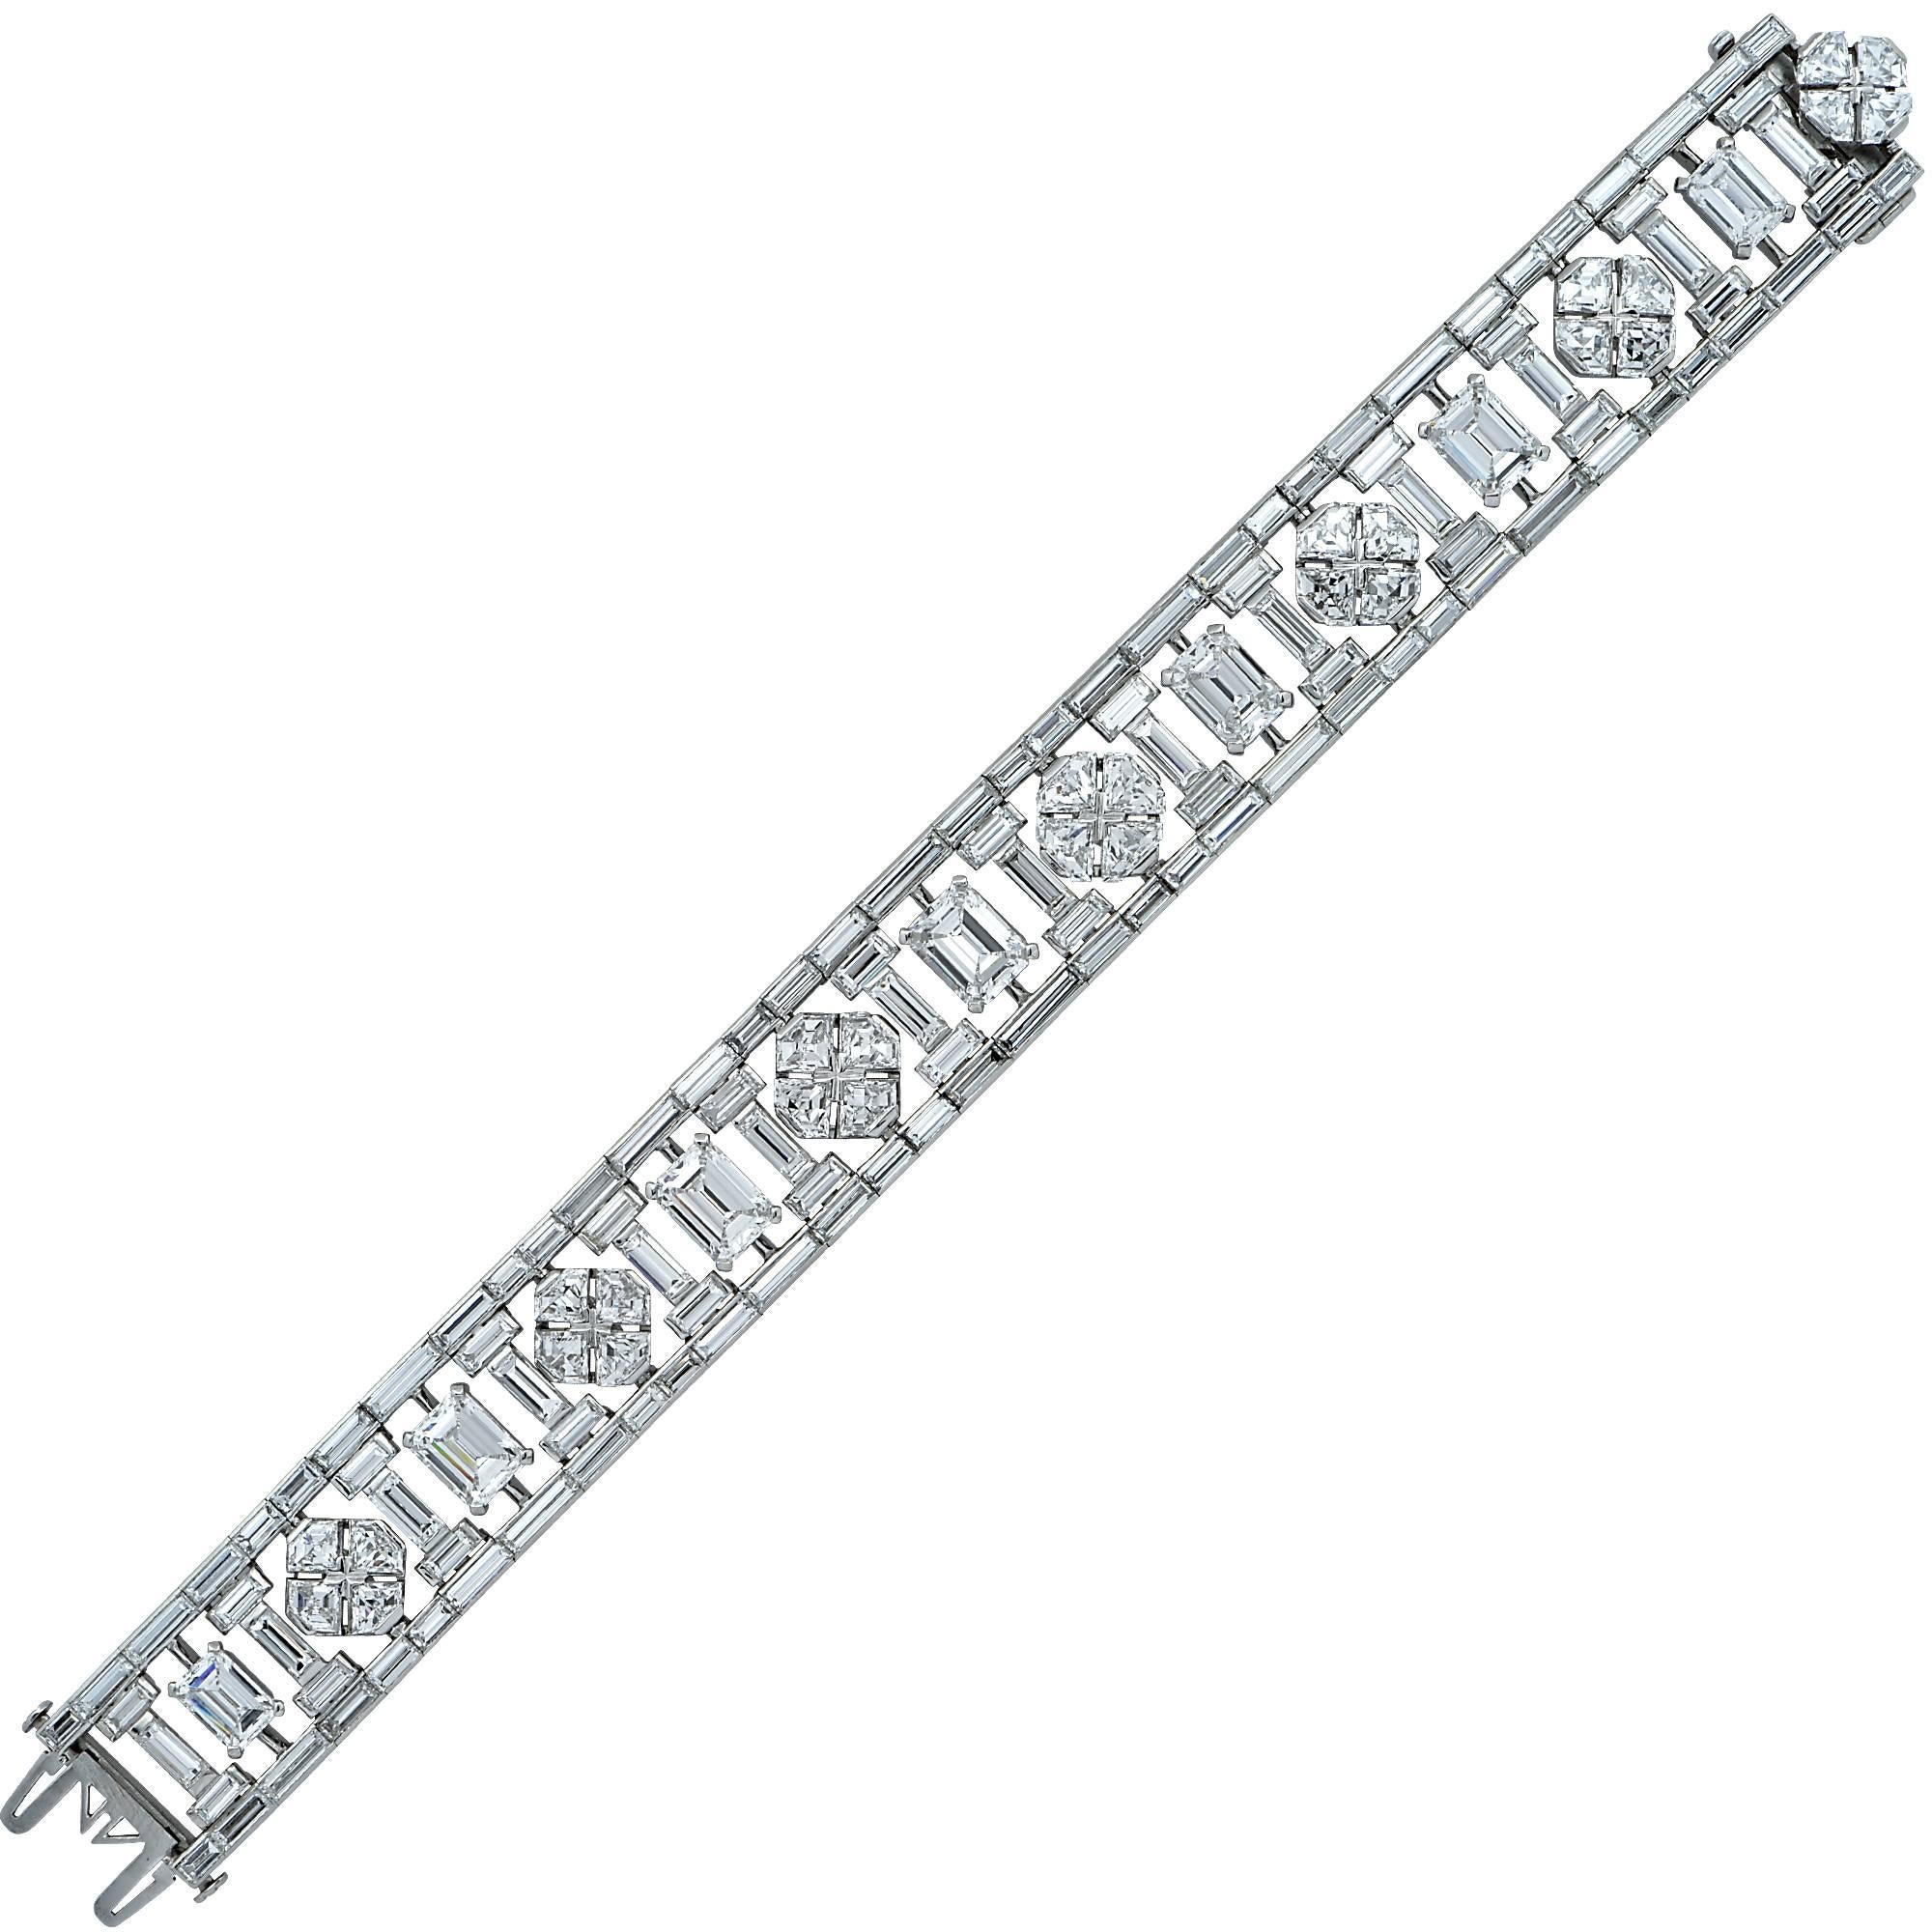 This magnificent and absolutely stunning platinum and diamond Mid - Century Circa 1940 line bracelet is truly spectacular. Although it is not signed, it is more than worthy of bearing hallmarks of the finest French jewelry creators from the period.